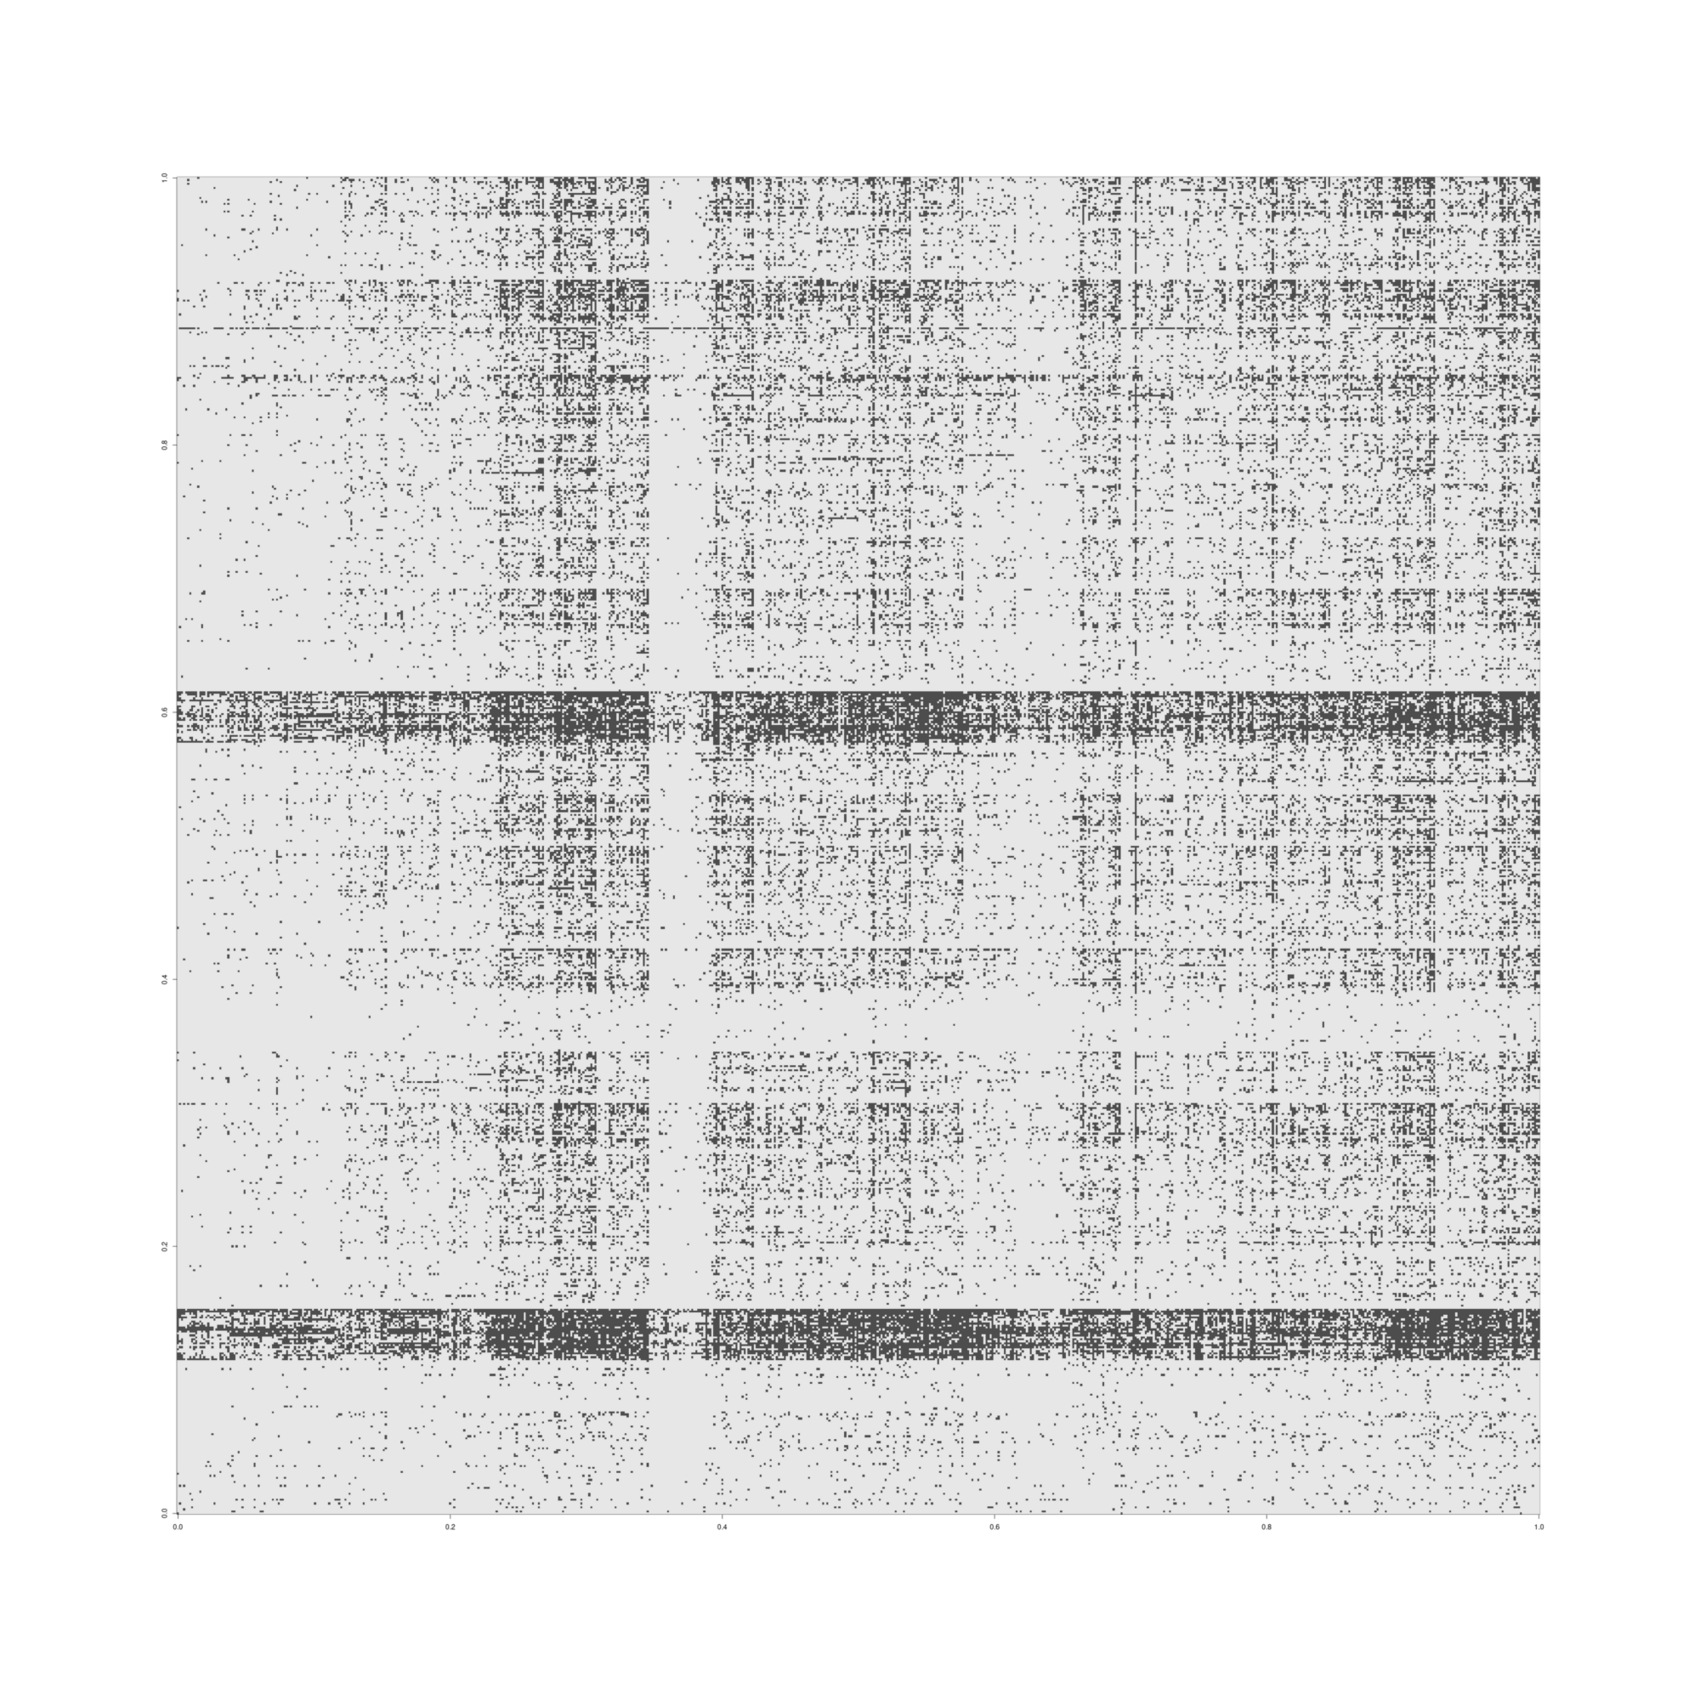 Visualization of missingness of four-letter-acronyms, A–Z (wrapped into a 676×676 grid; read: top to bottom, left to right).